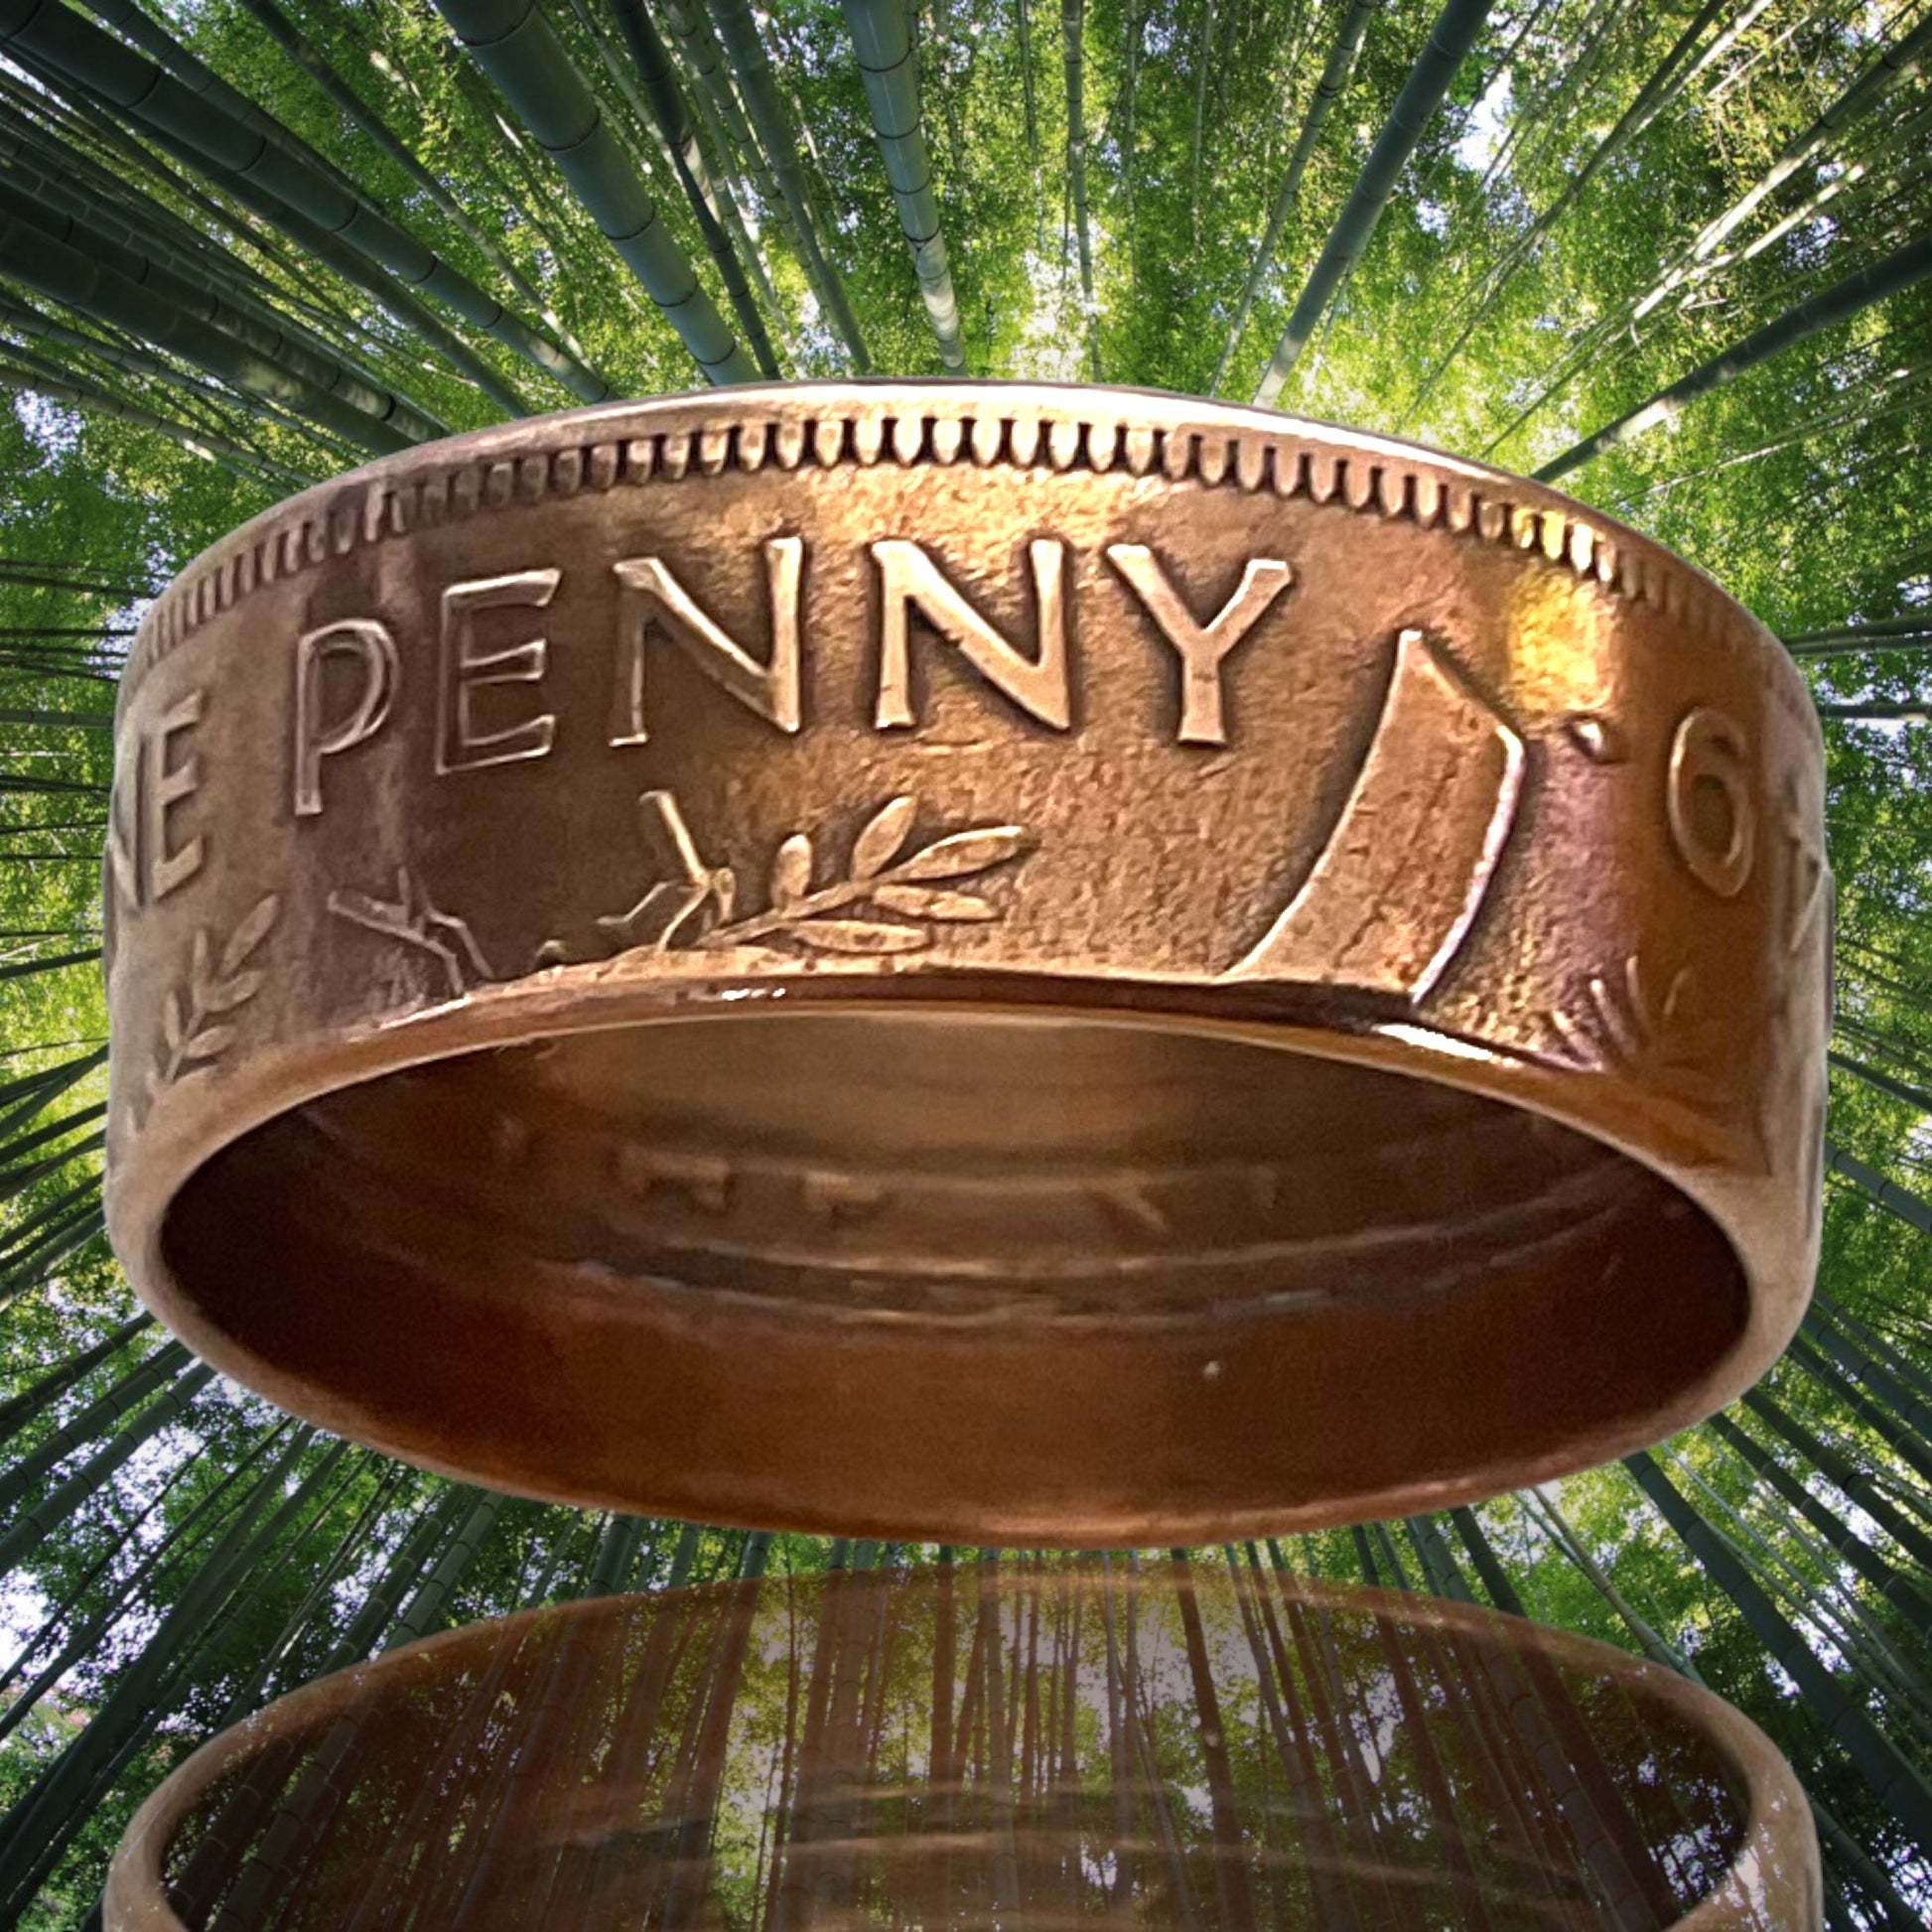 nz one penny coin ring